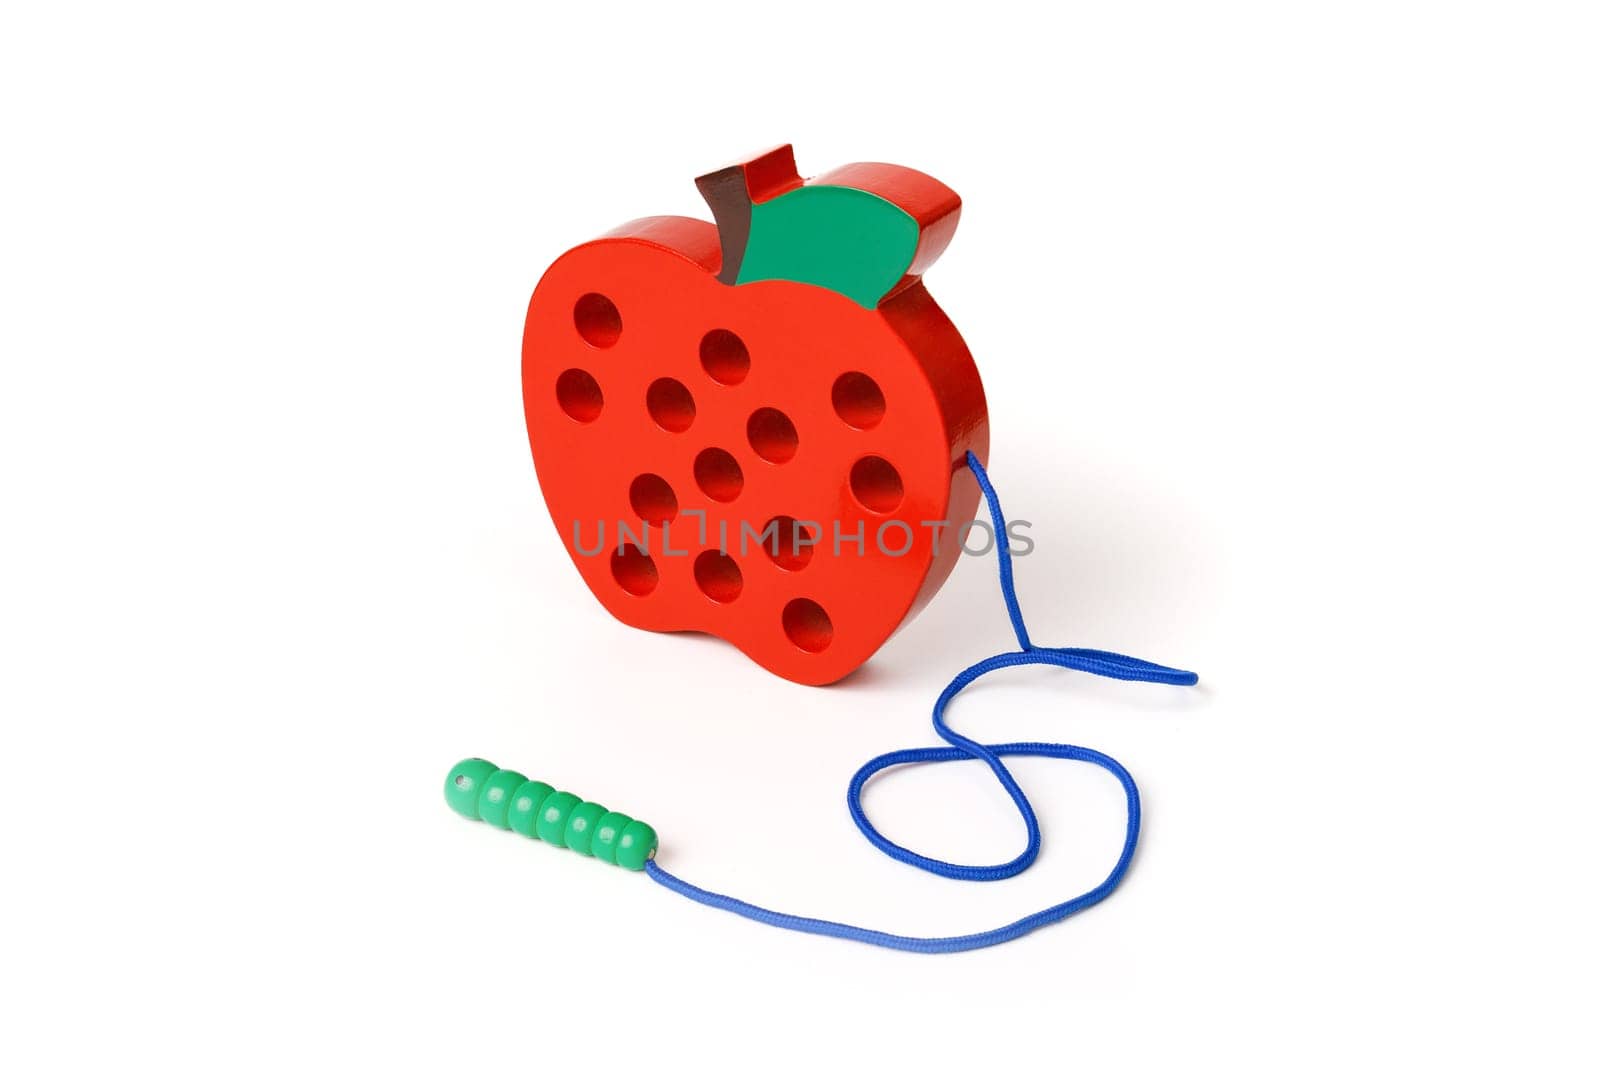 Children's wooden toy in the shape of a red apple with a worm on a rope isolated on white background.